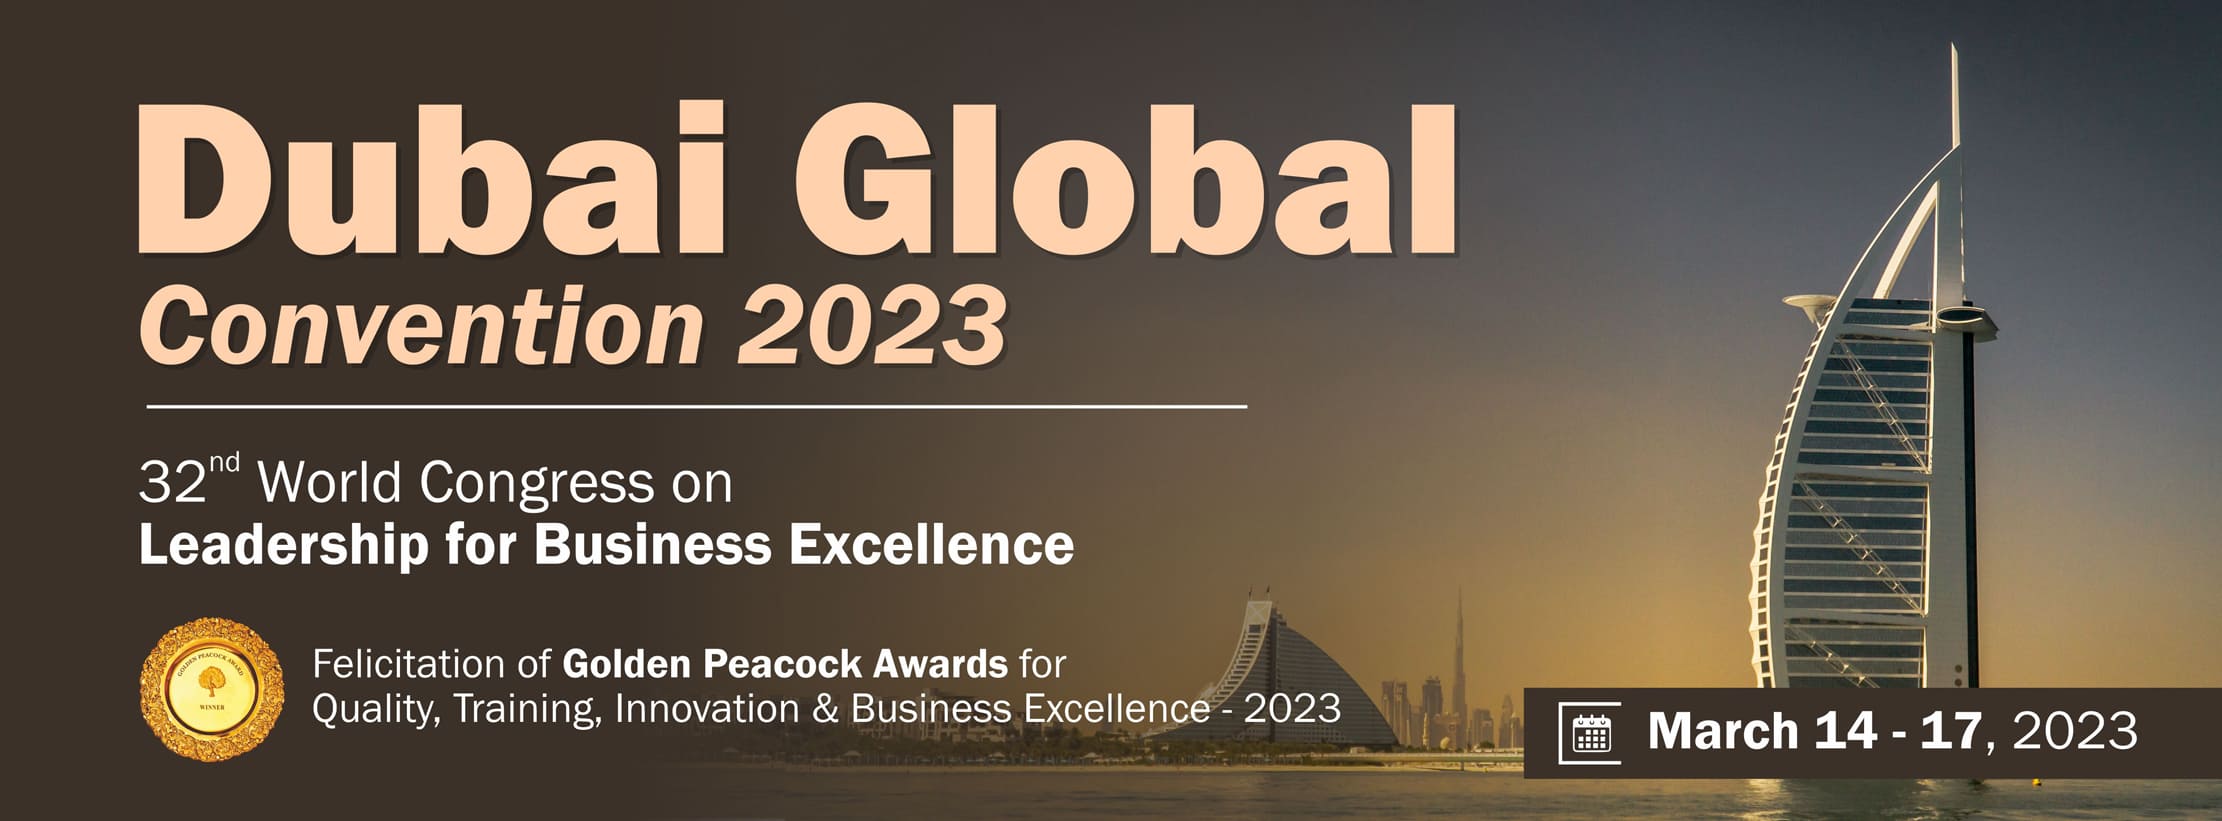 Dubai Global Convention - 2023<br/> on Leadership for Business Excellence